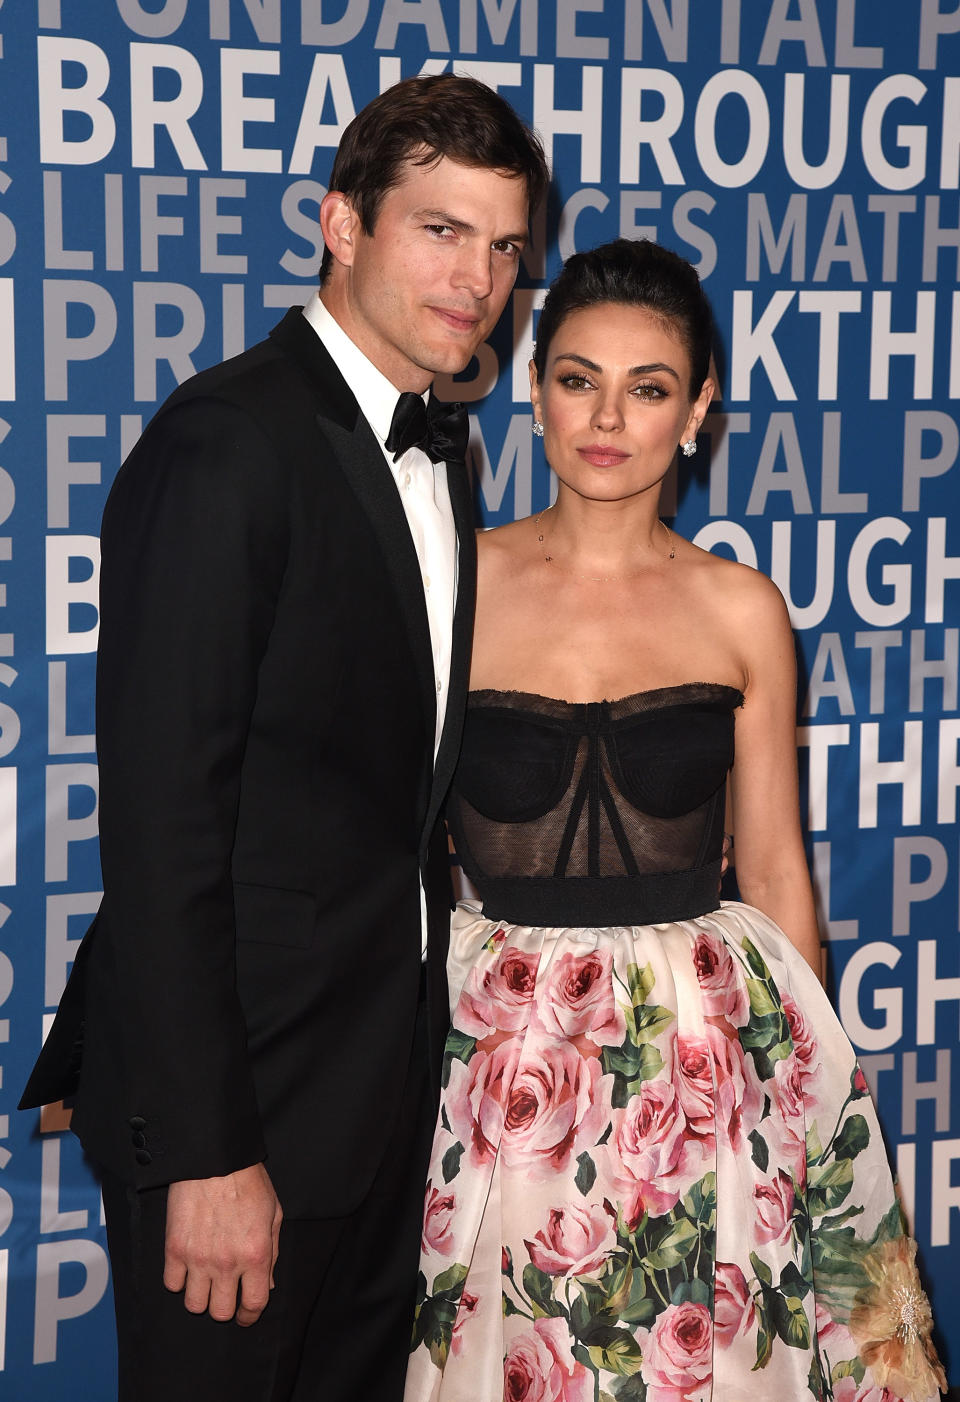 Ashton Kutcher and Mila Kunis at NASA Ames Research Center on Dec. 3 in Mountain View, Calif. (Photo: Getty Images)